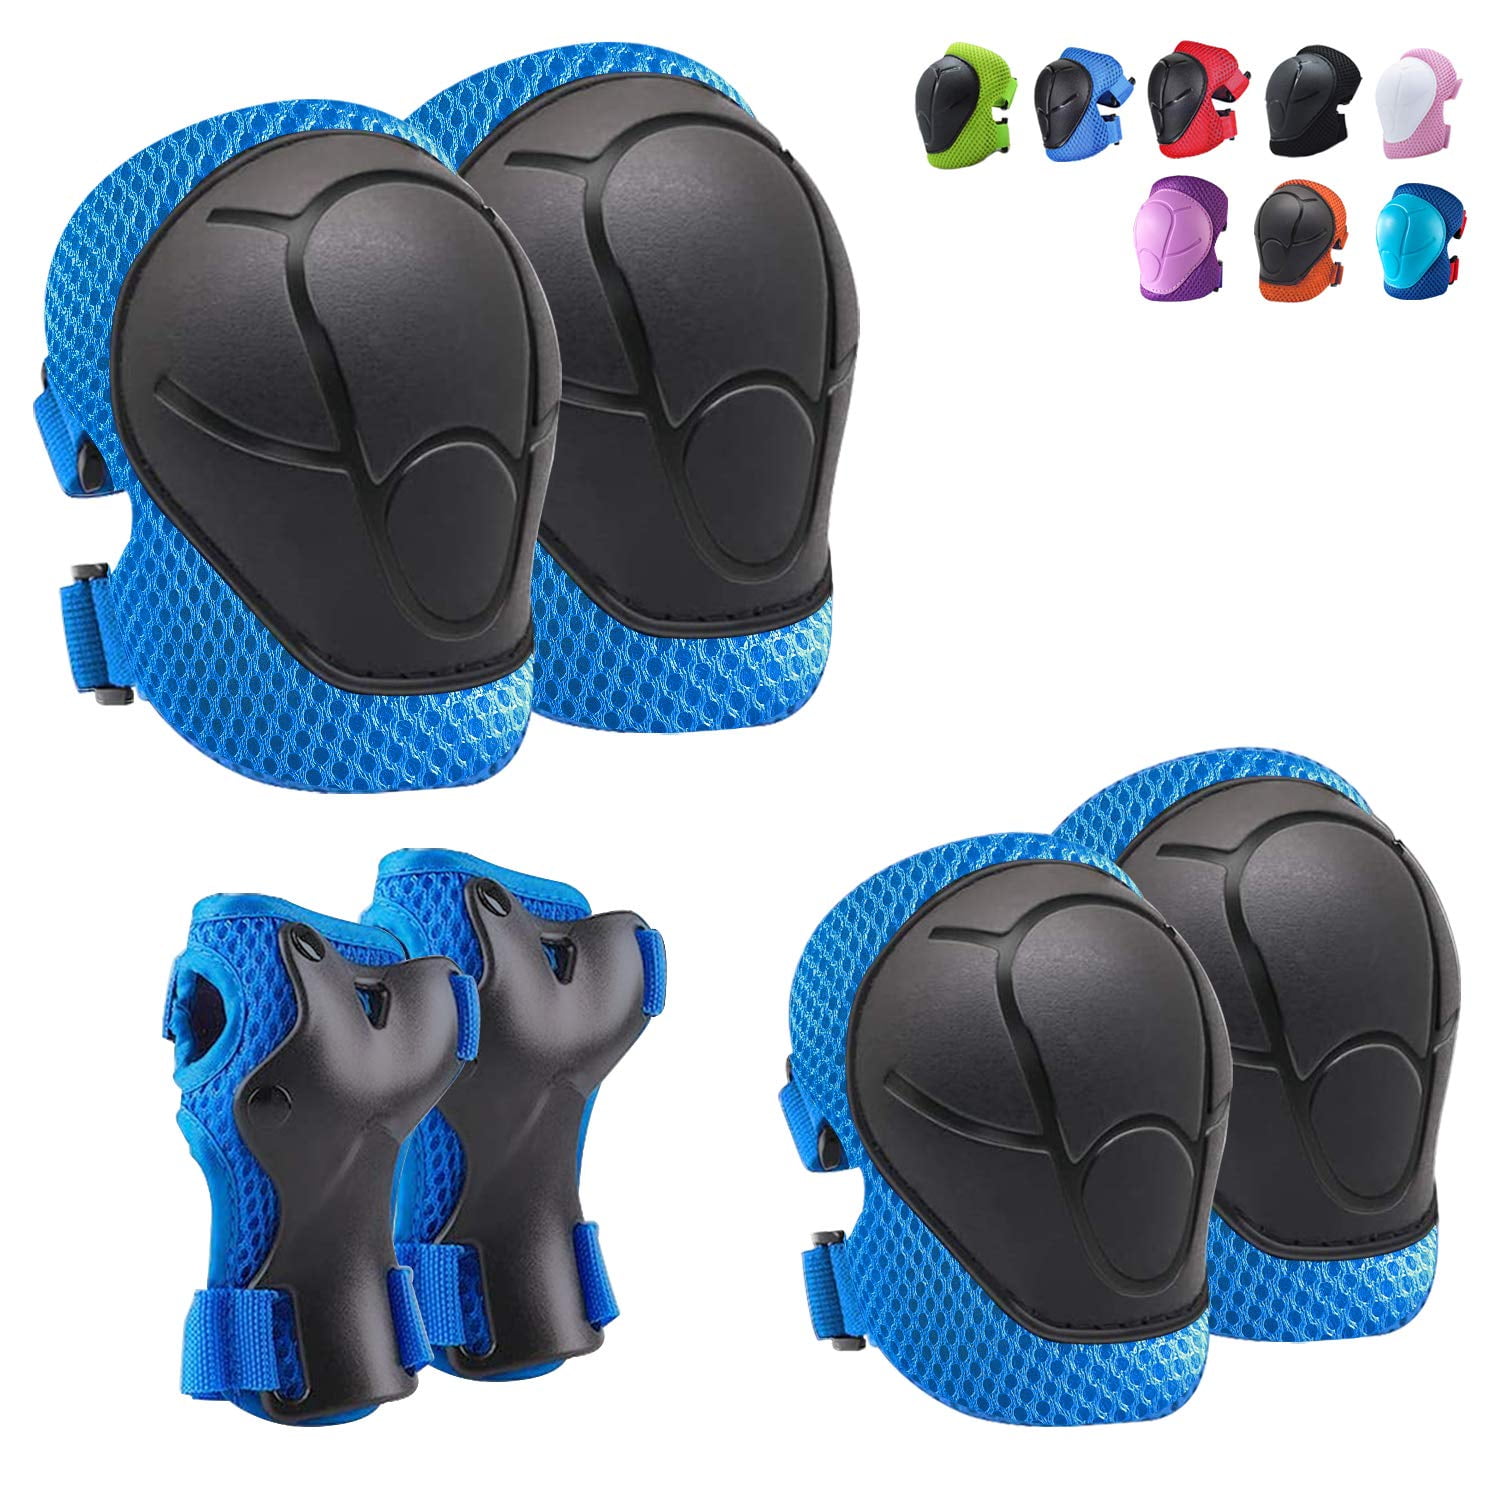 Elbow Knee Protective Guard Safety Gear Pads Skate Bicycle Kids and Teens C 